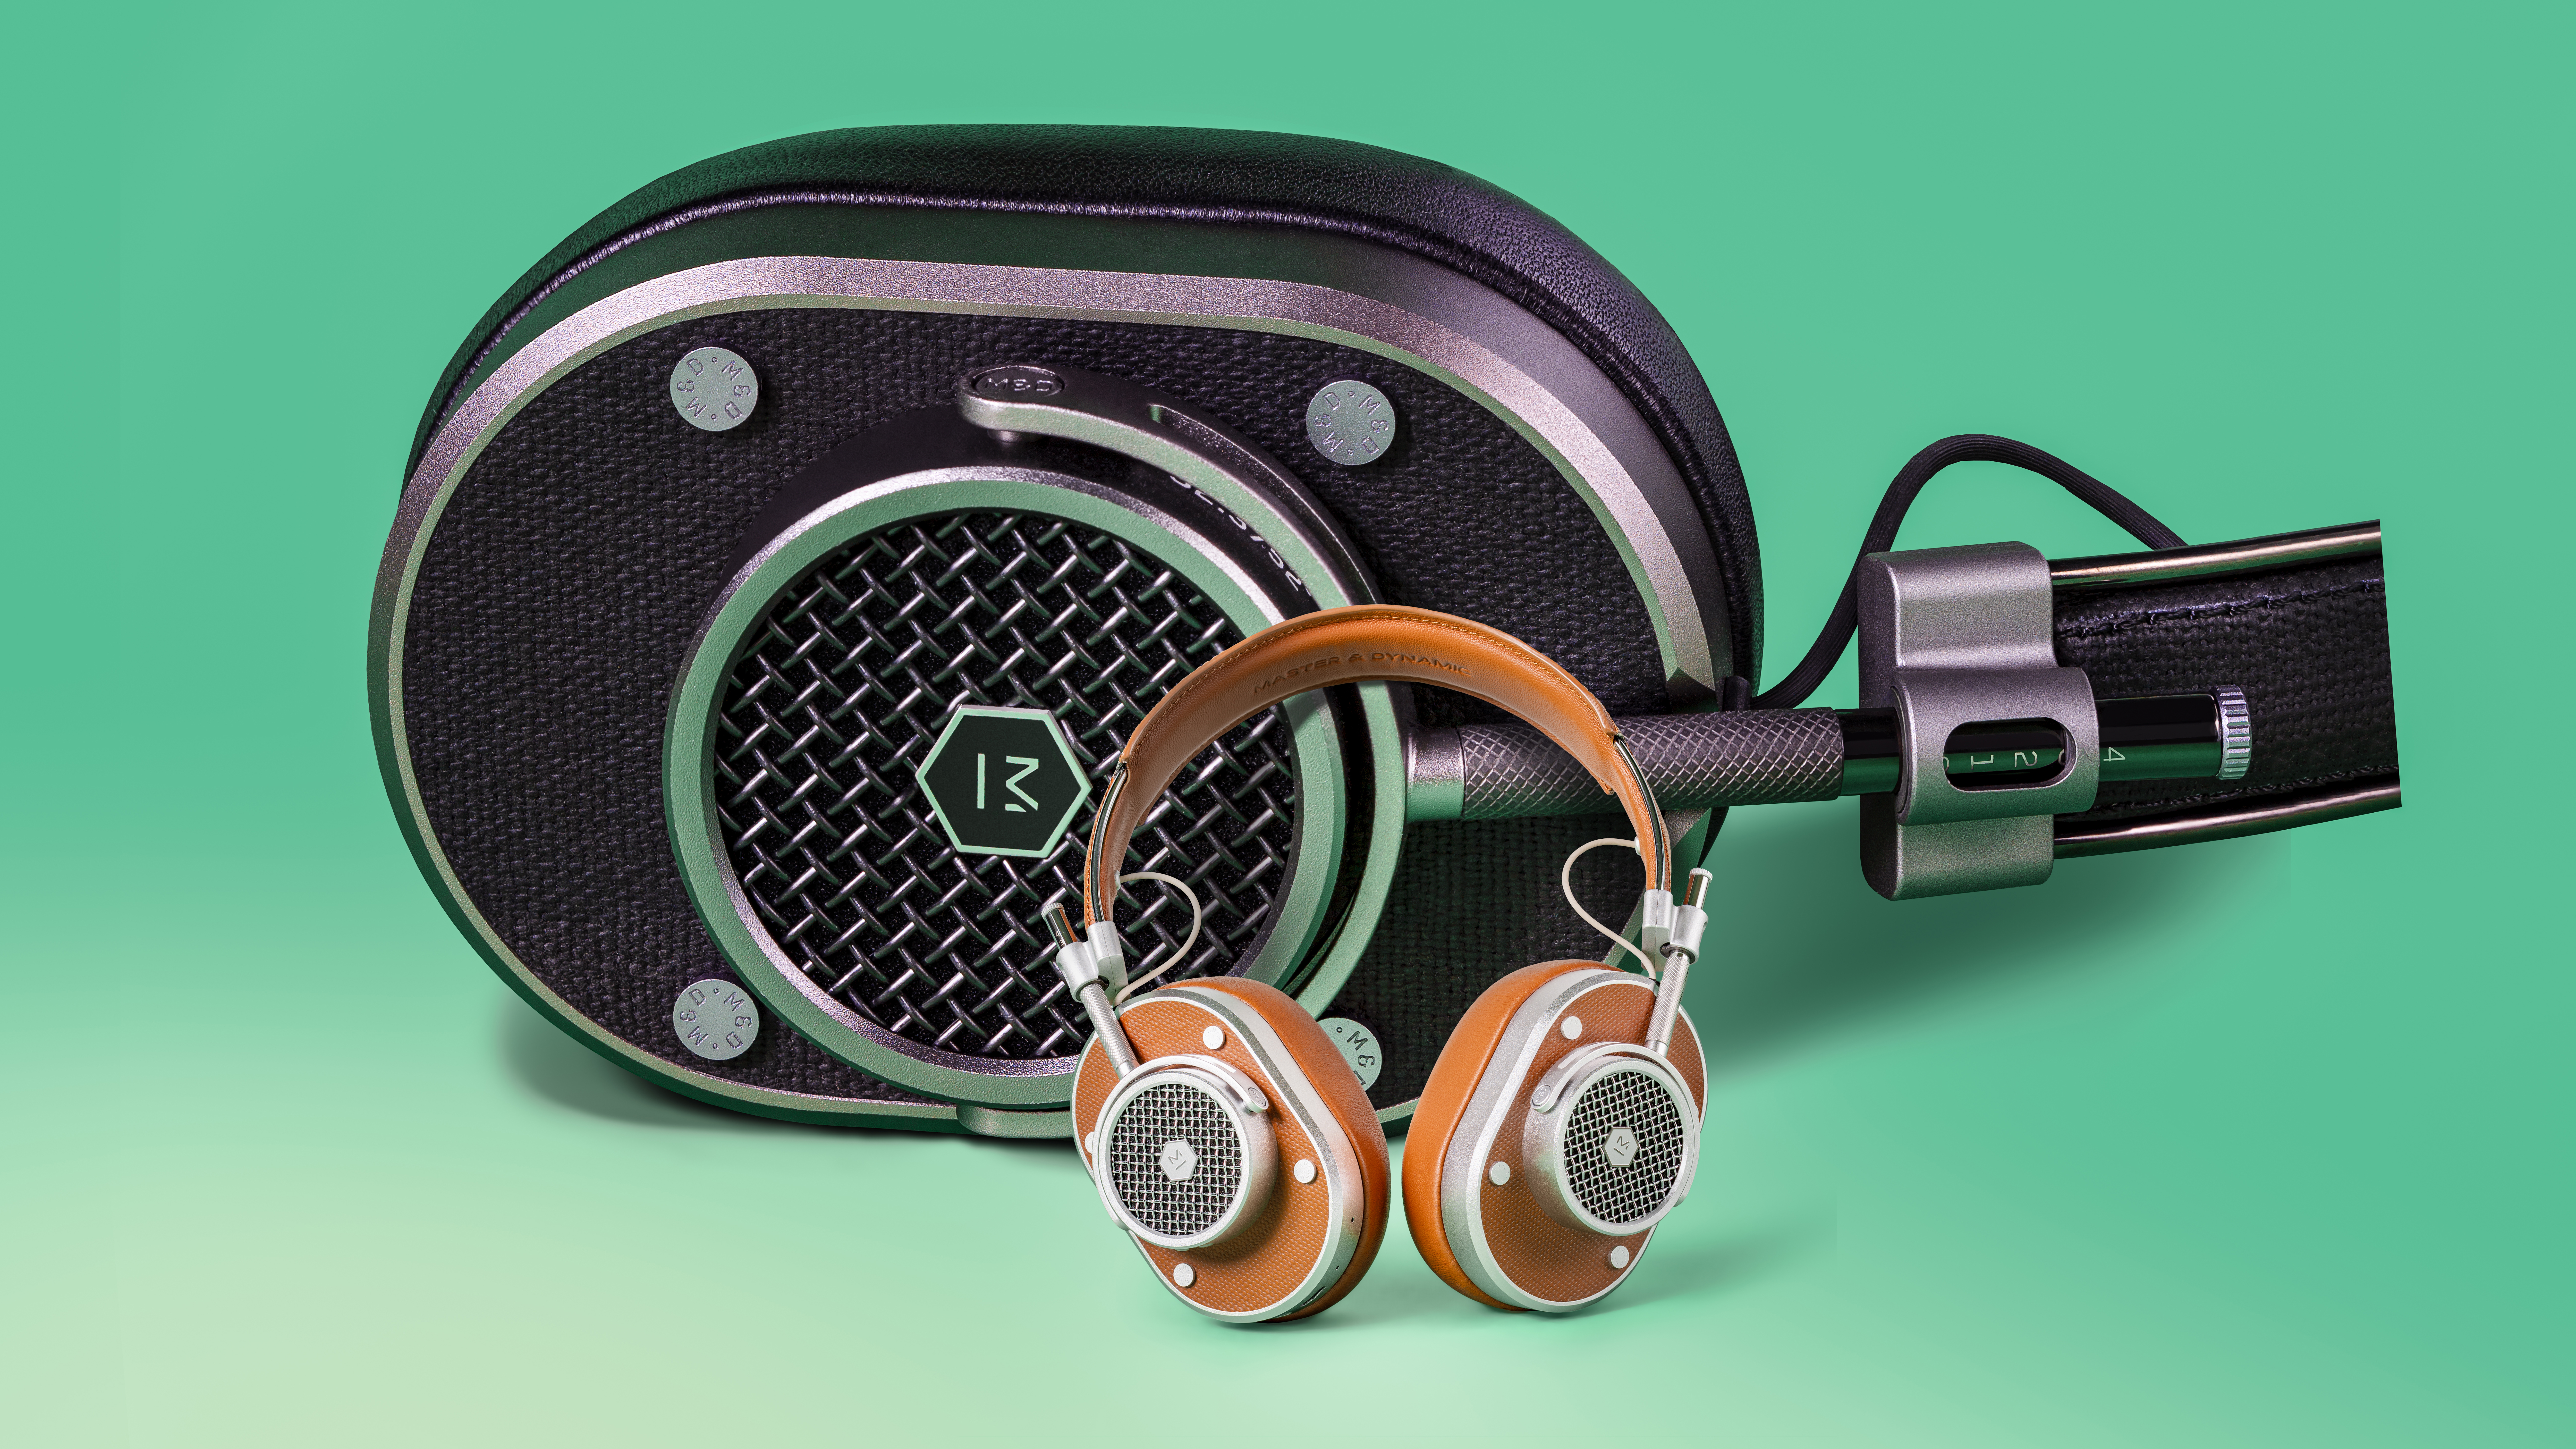 The newest generation of MH40 stays true to our signature headphones' timeless design 